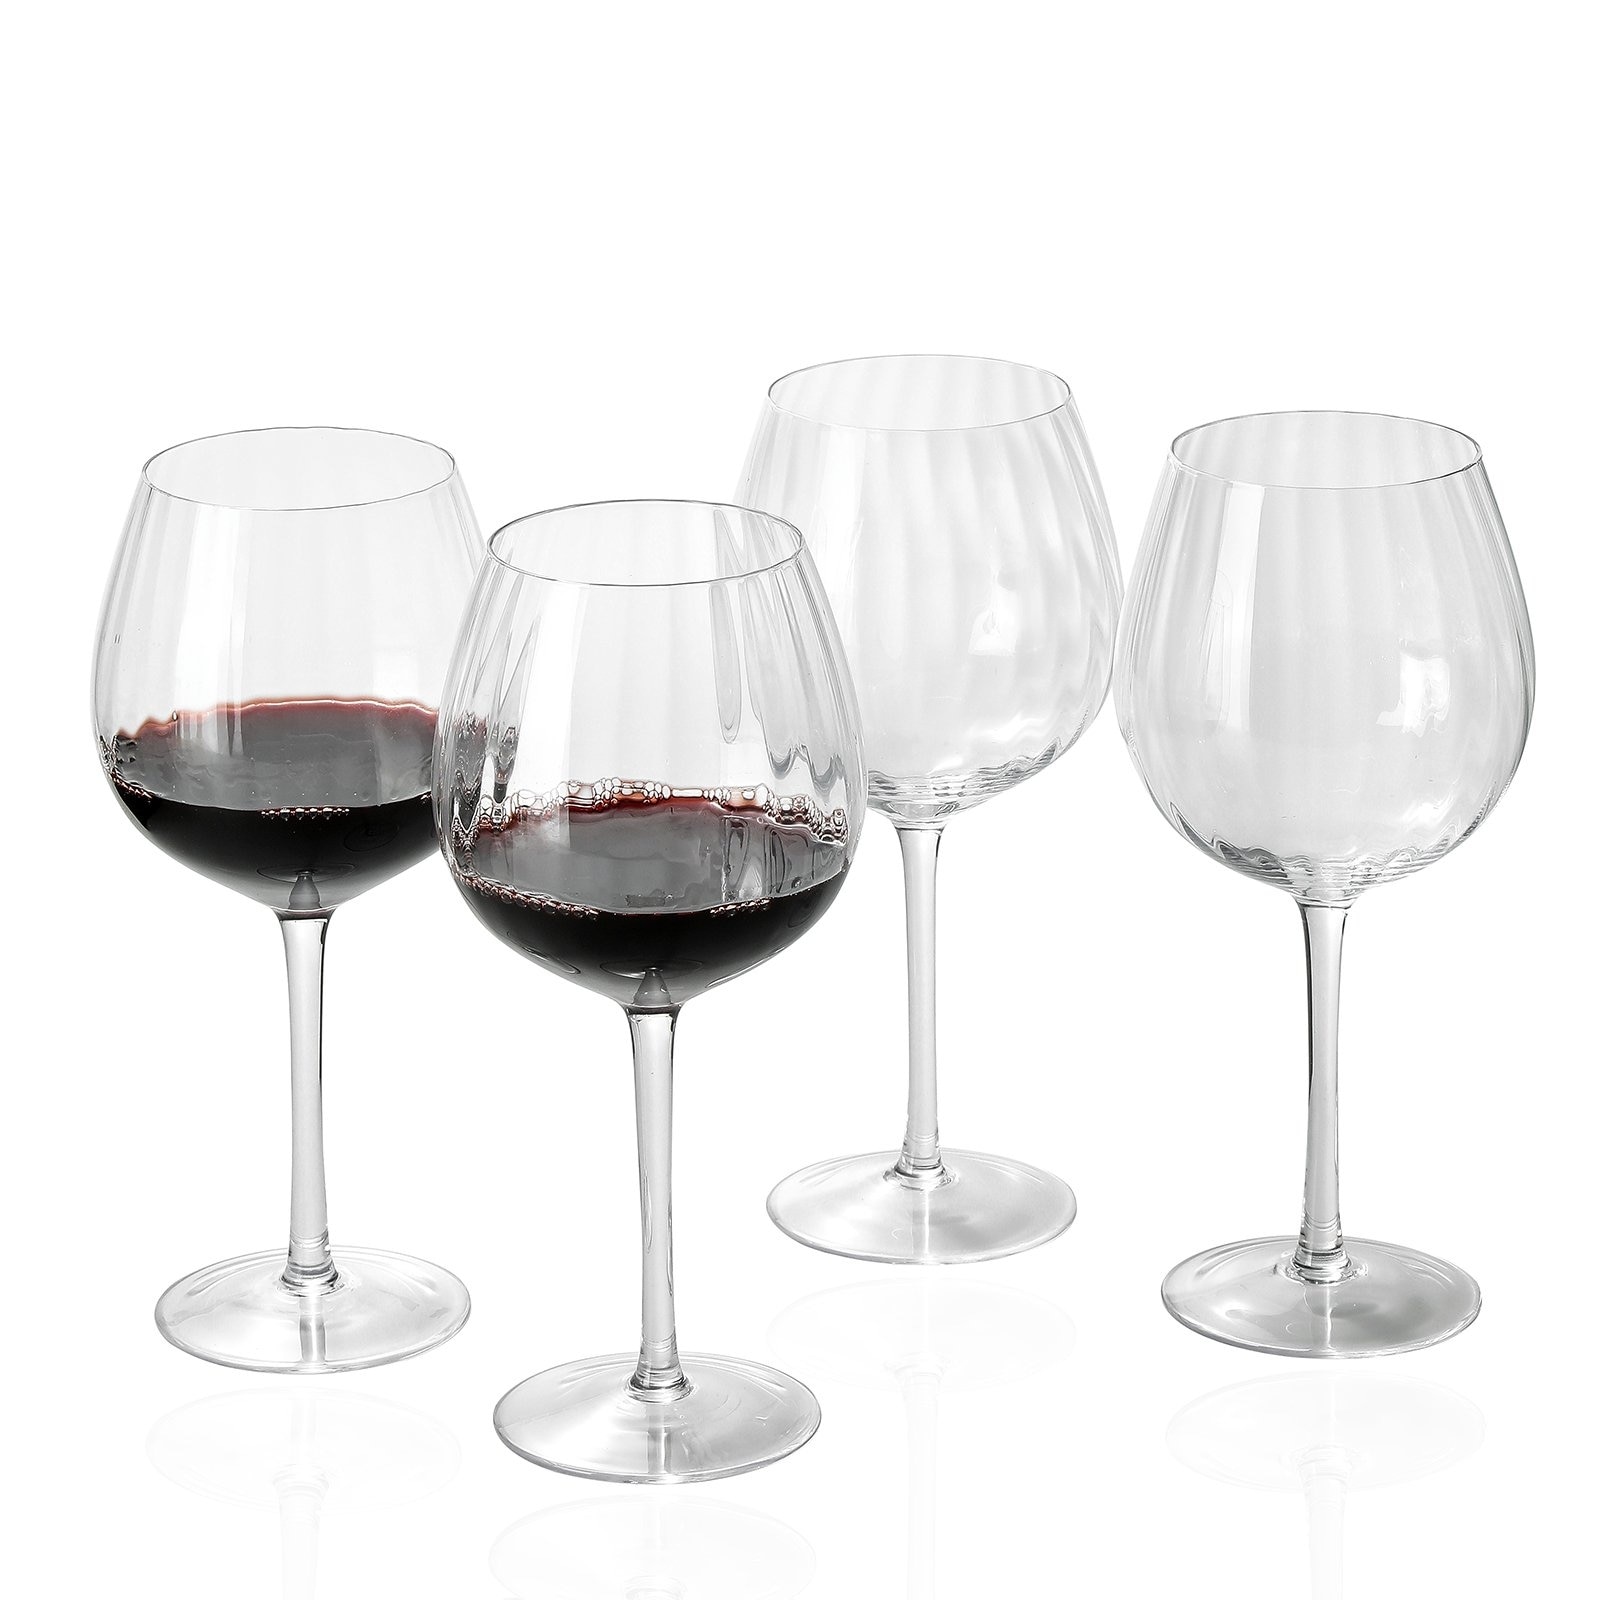 https://ak1.ostkcdn.com/images/products/is/images/direct/d5272d2ec16a6266db3ef6894b3219d68a8b32ee/Ribbed-Optic-Wine-Glasses-set-of-4.jpg